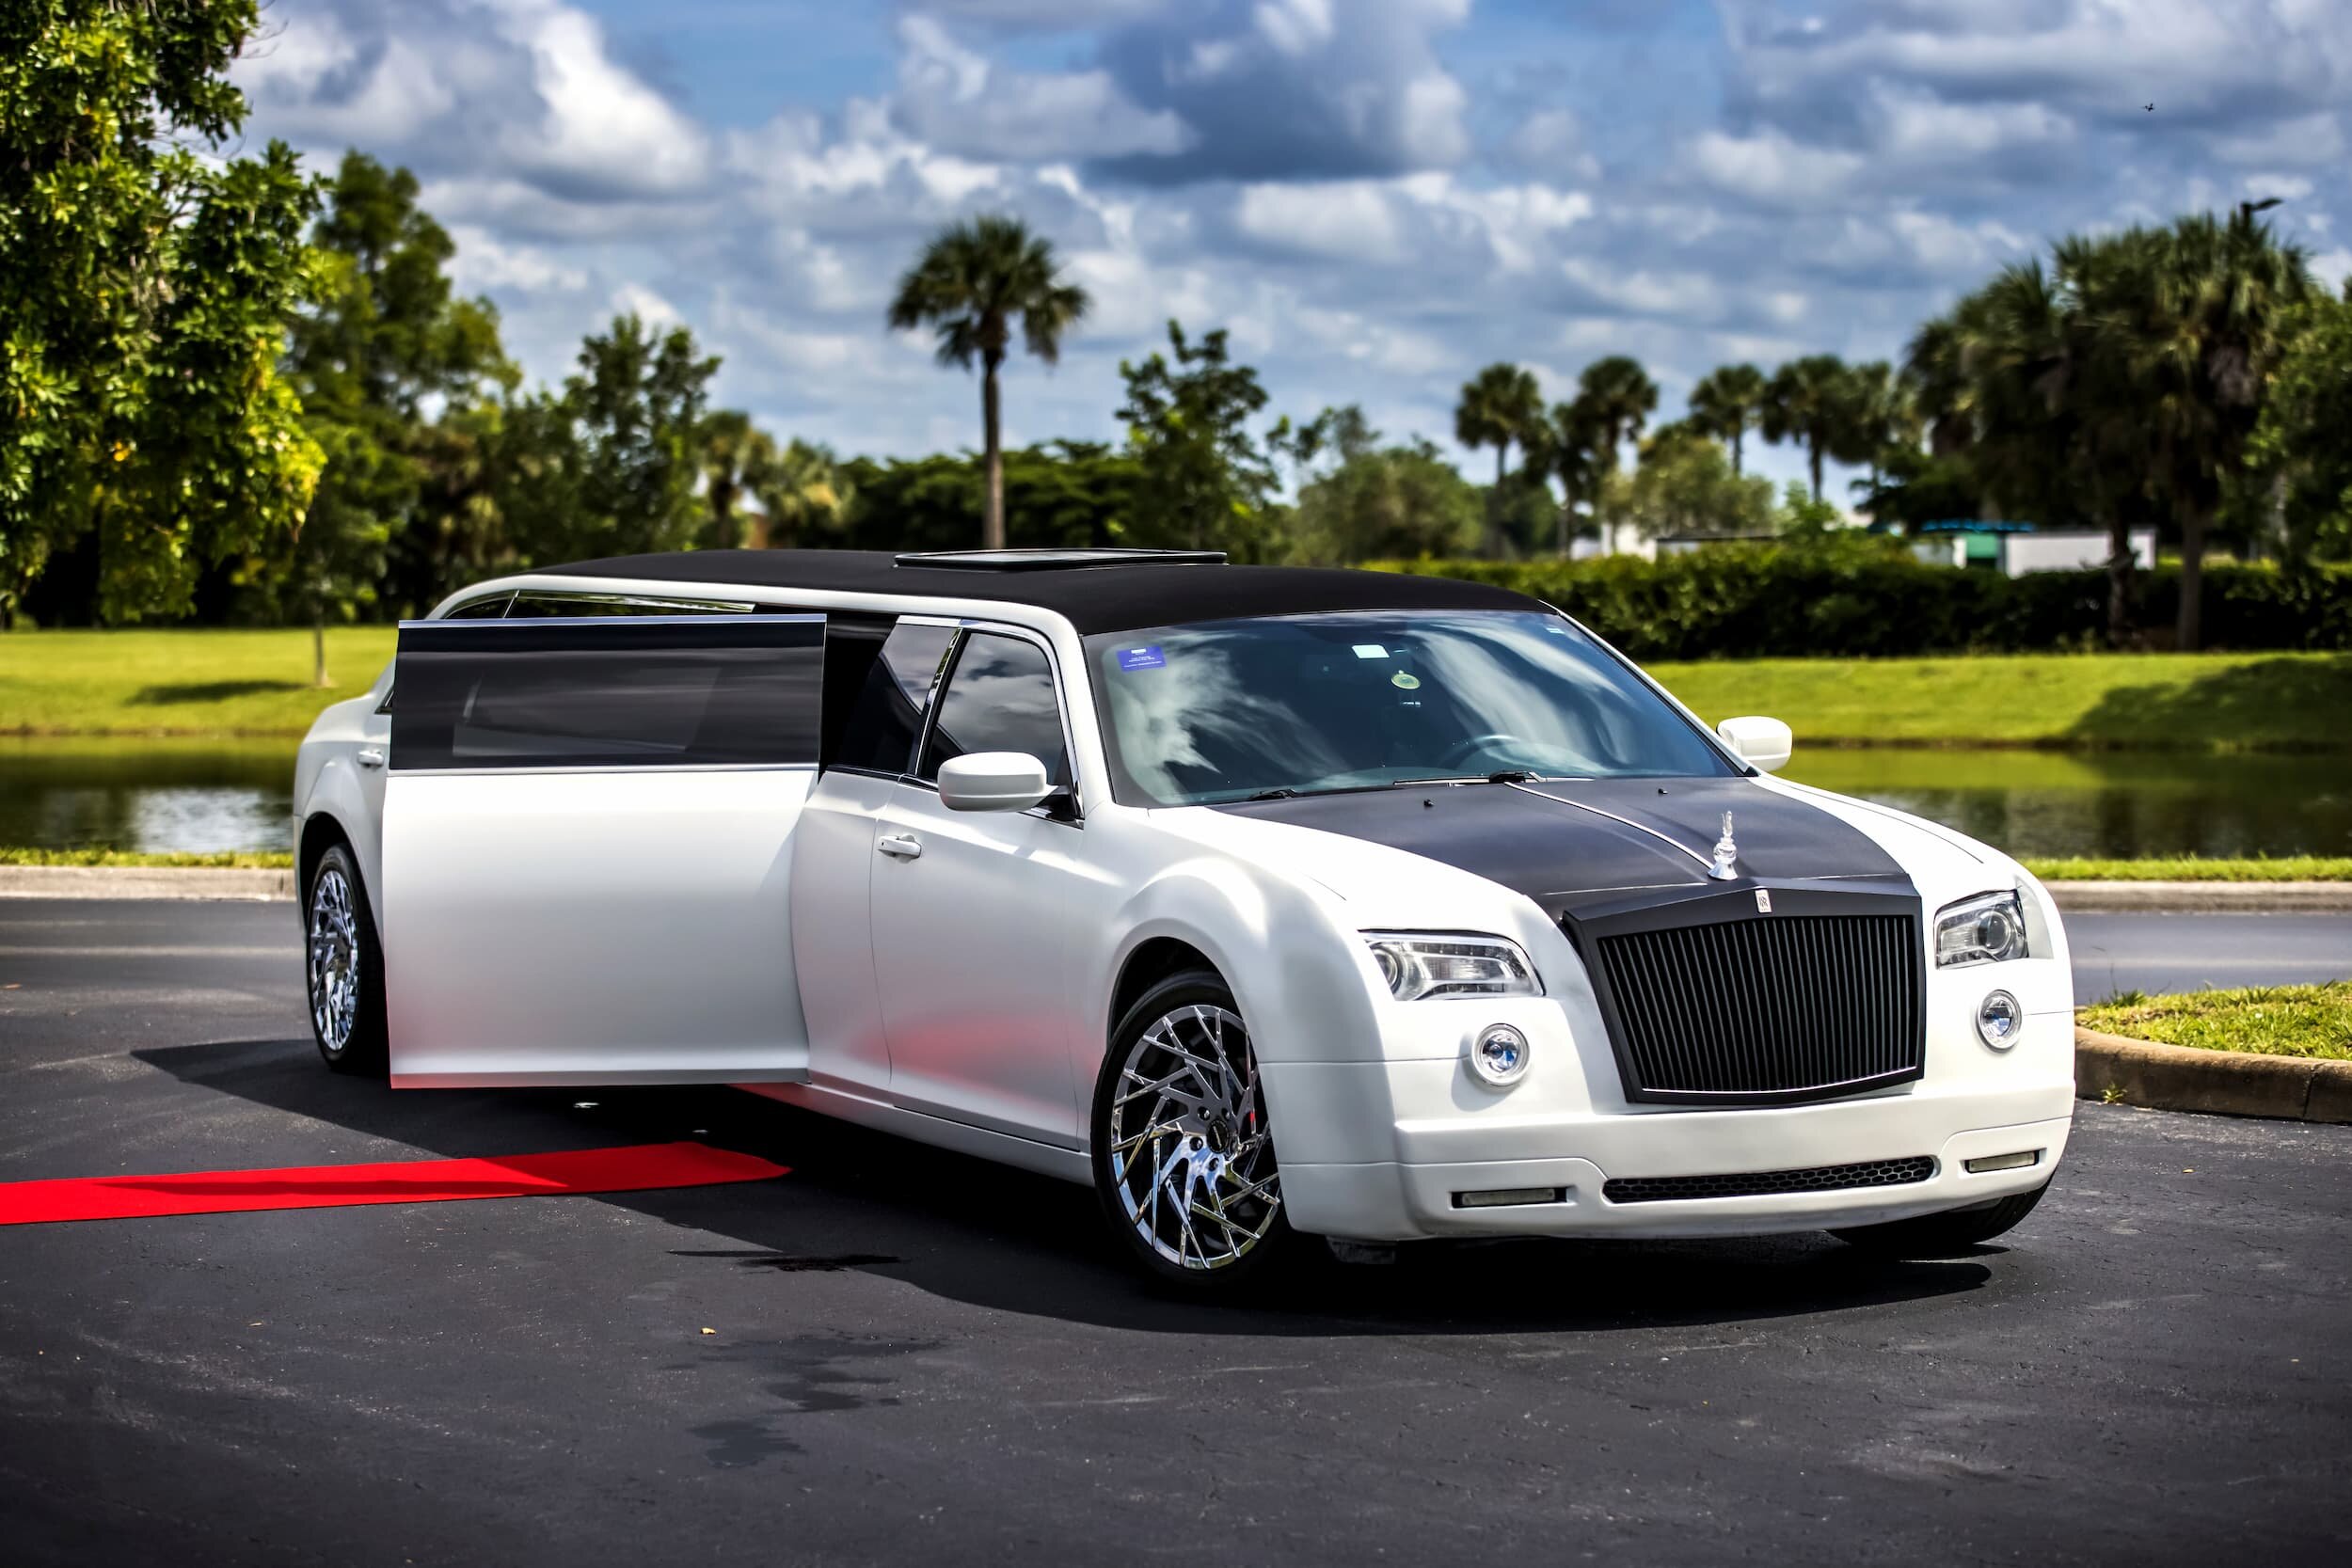 VIP Limo Service: Ft. Myers & Naples Limo & Party Bus Rentals